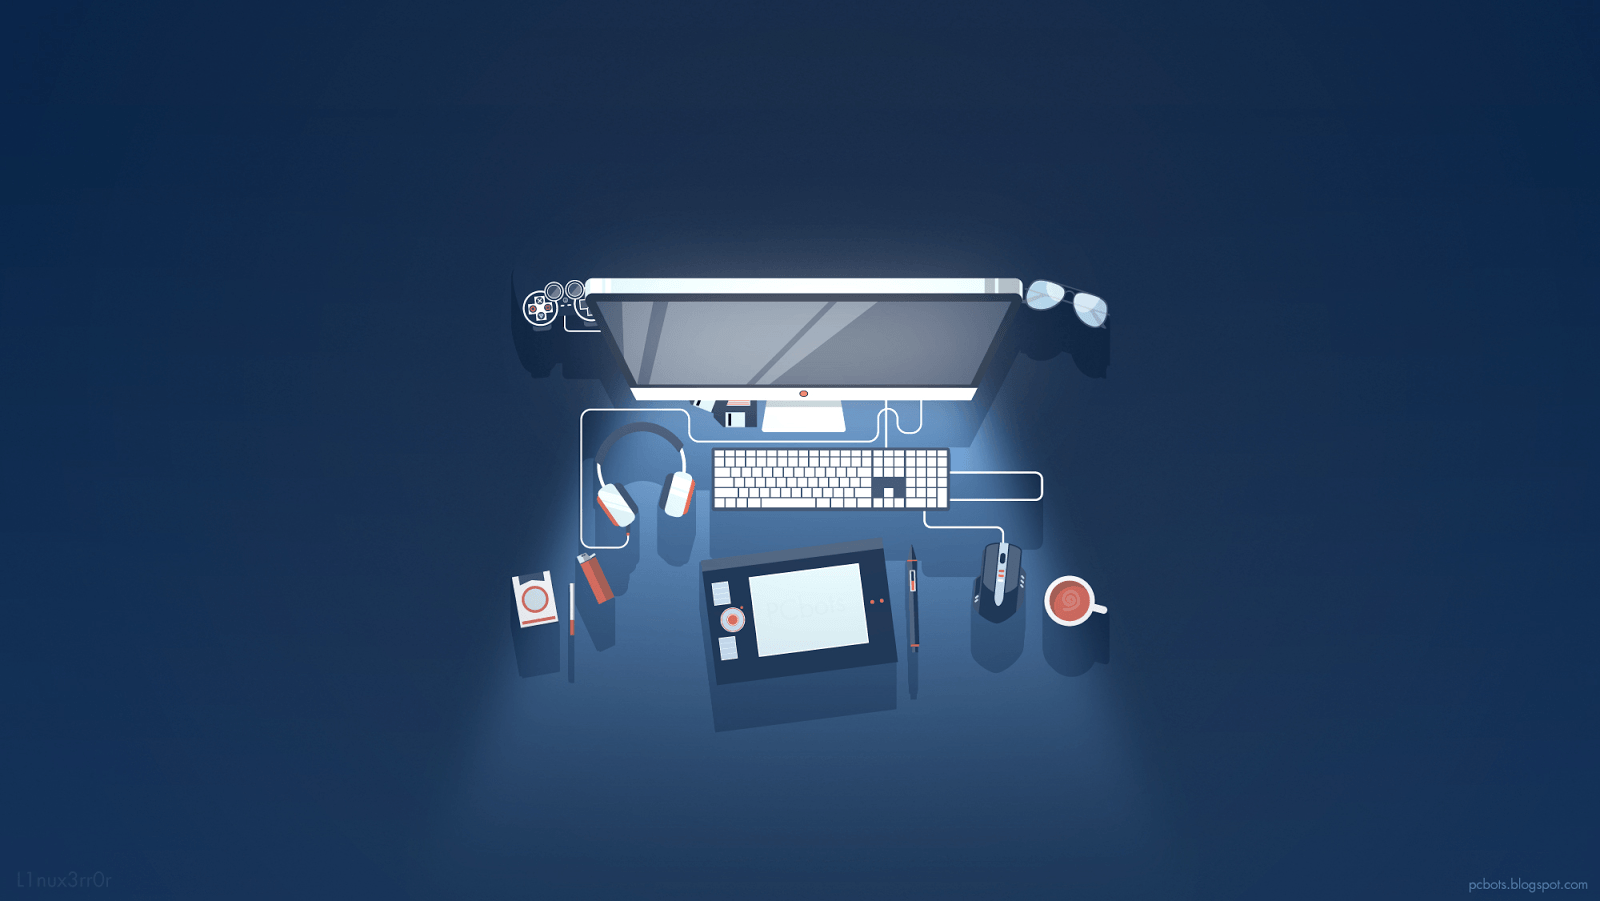 Programmers Wallpapers By PCbots